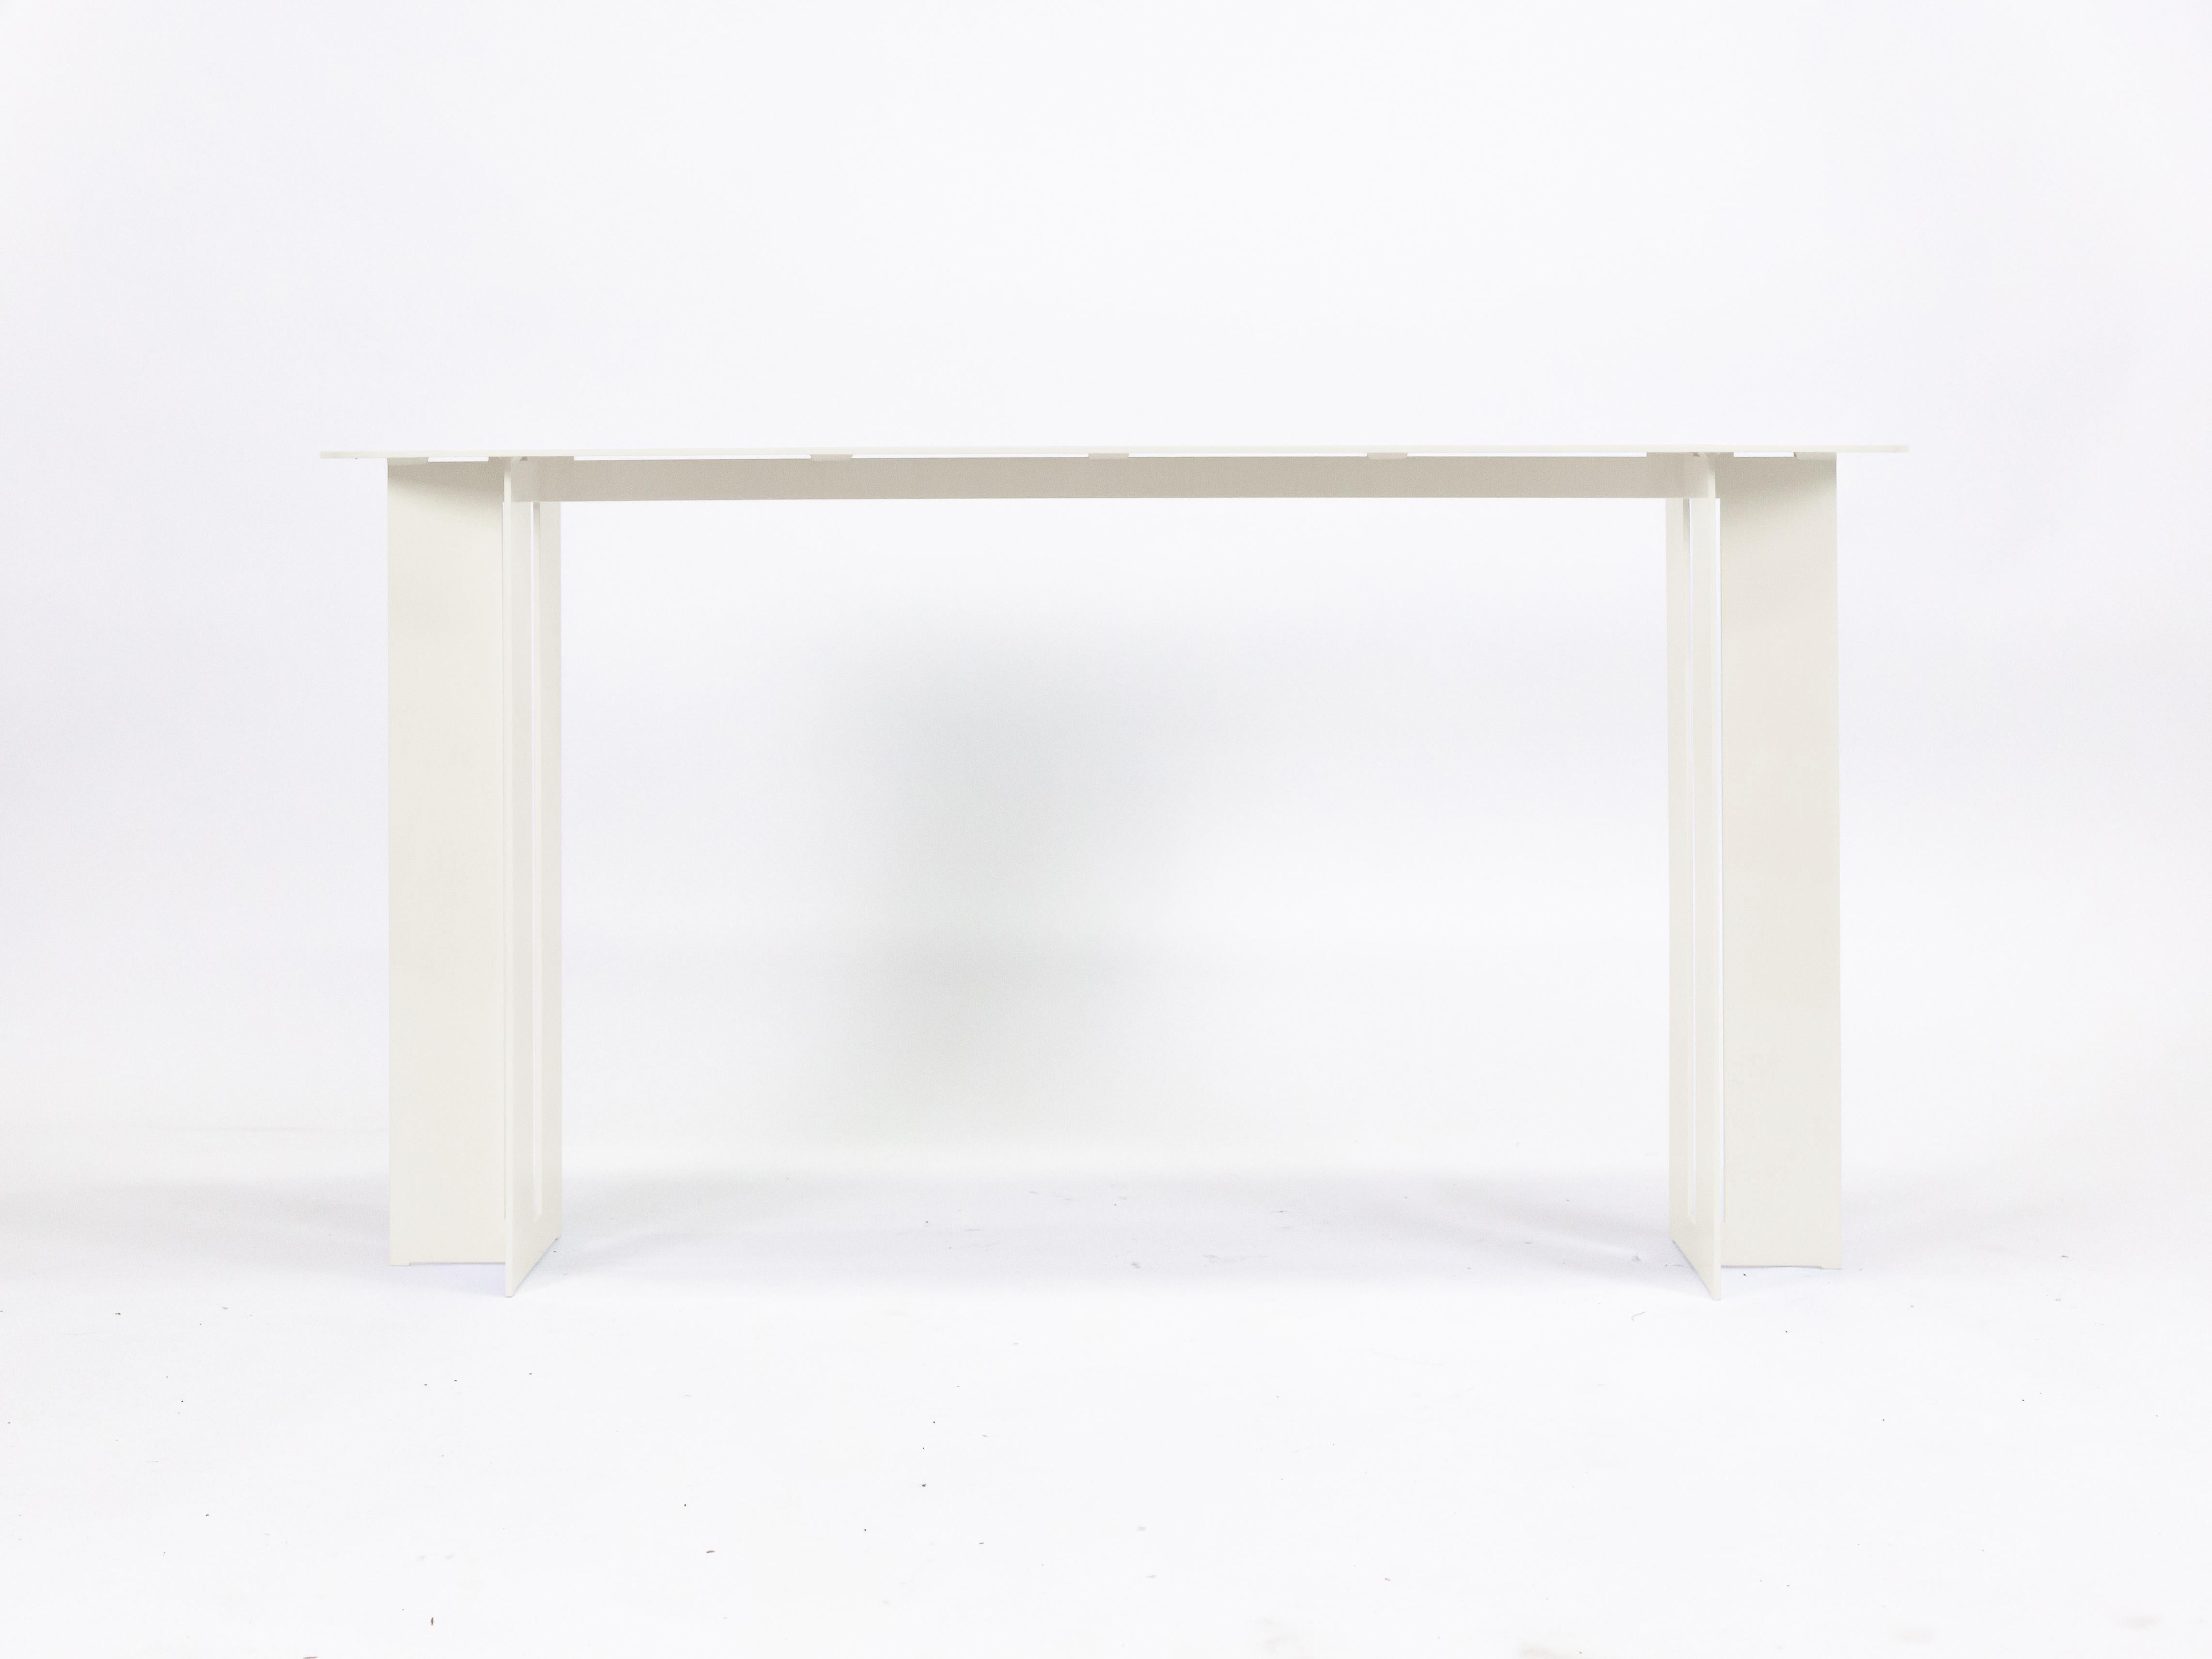 The Mers console table is fabricated from solid aluminum and is suitable for use indoors and out. Form is inspired by the simple utilitarianism of West Coast aluminum fishing boats.

Shown in aluminum with cream painted finish.
Custom sizing and